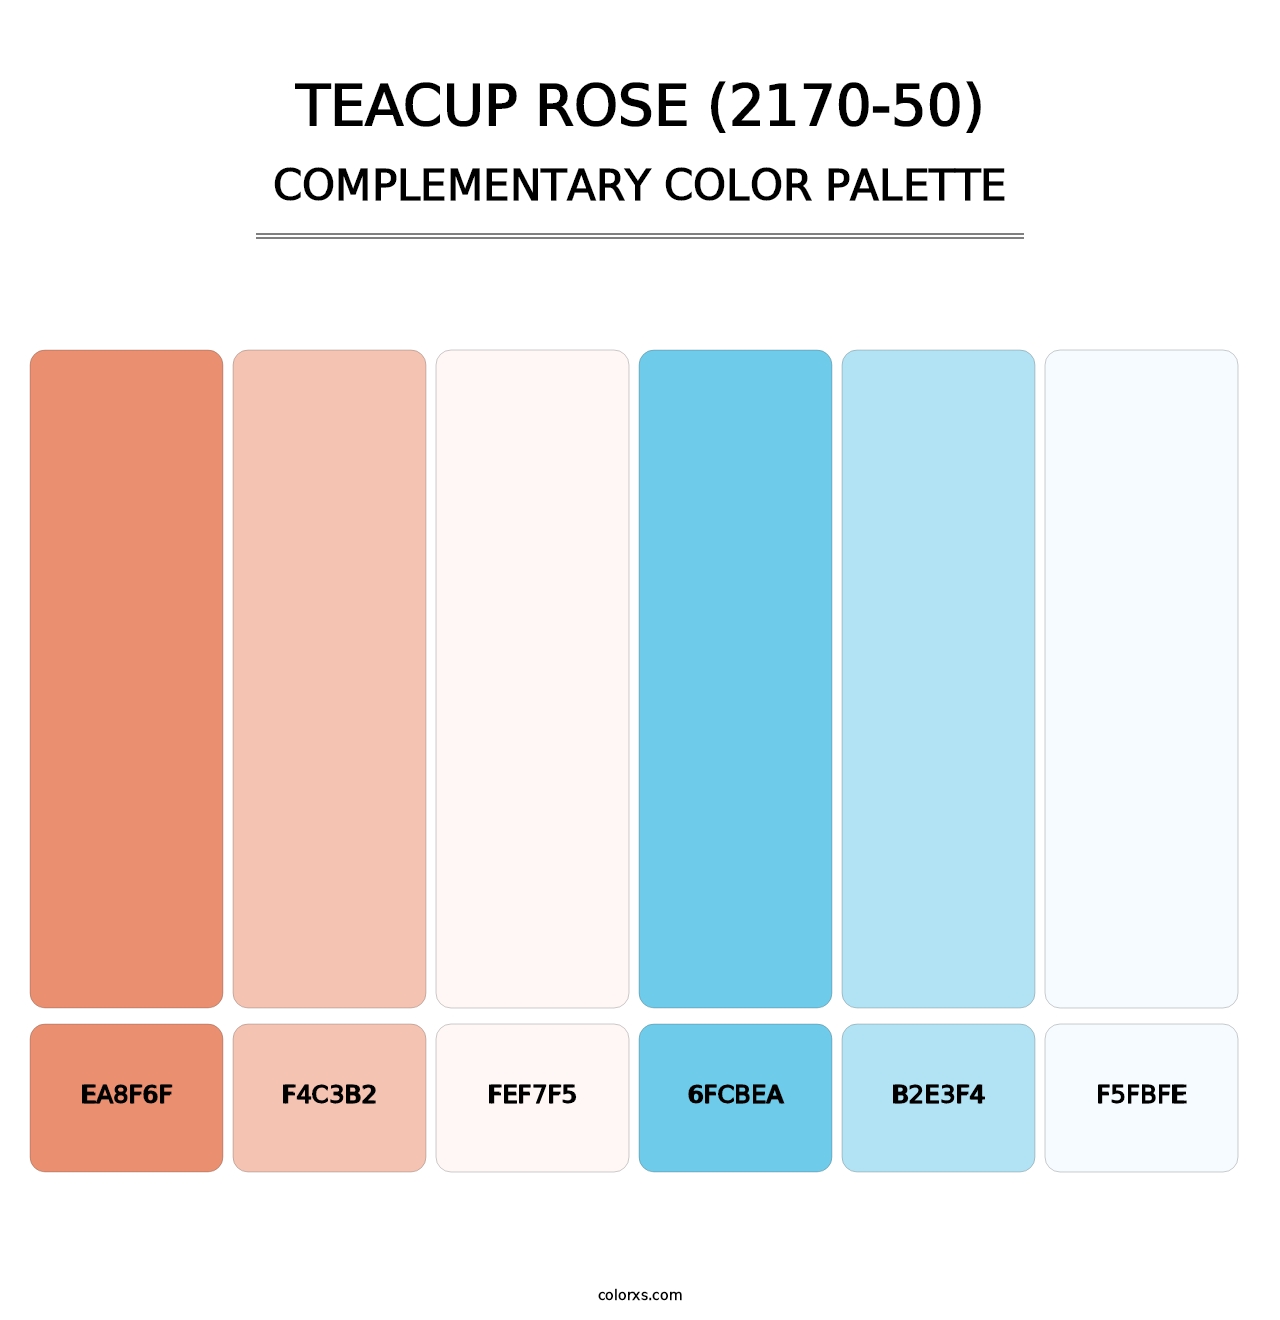 Teacup Rose (2170-50) - Complementary Color Palette